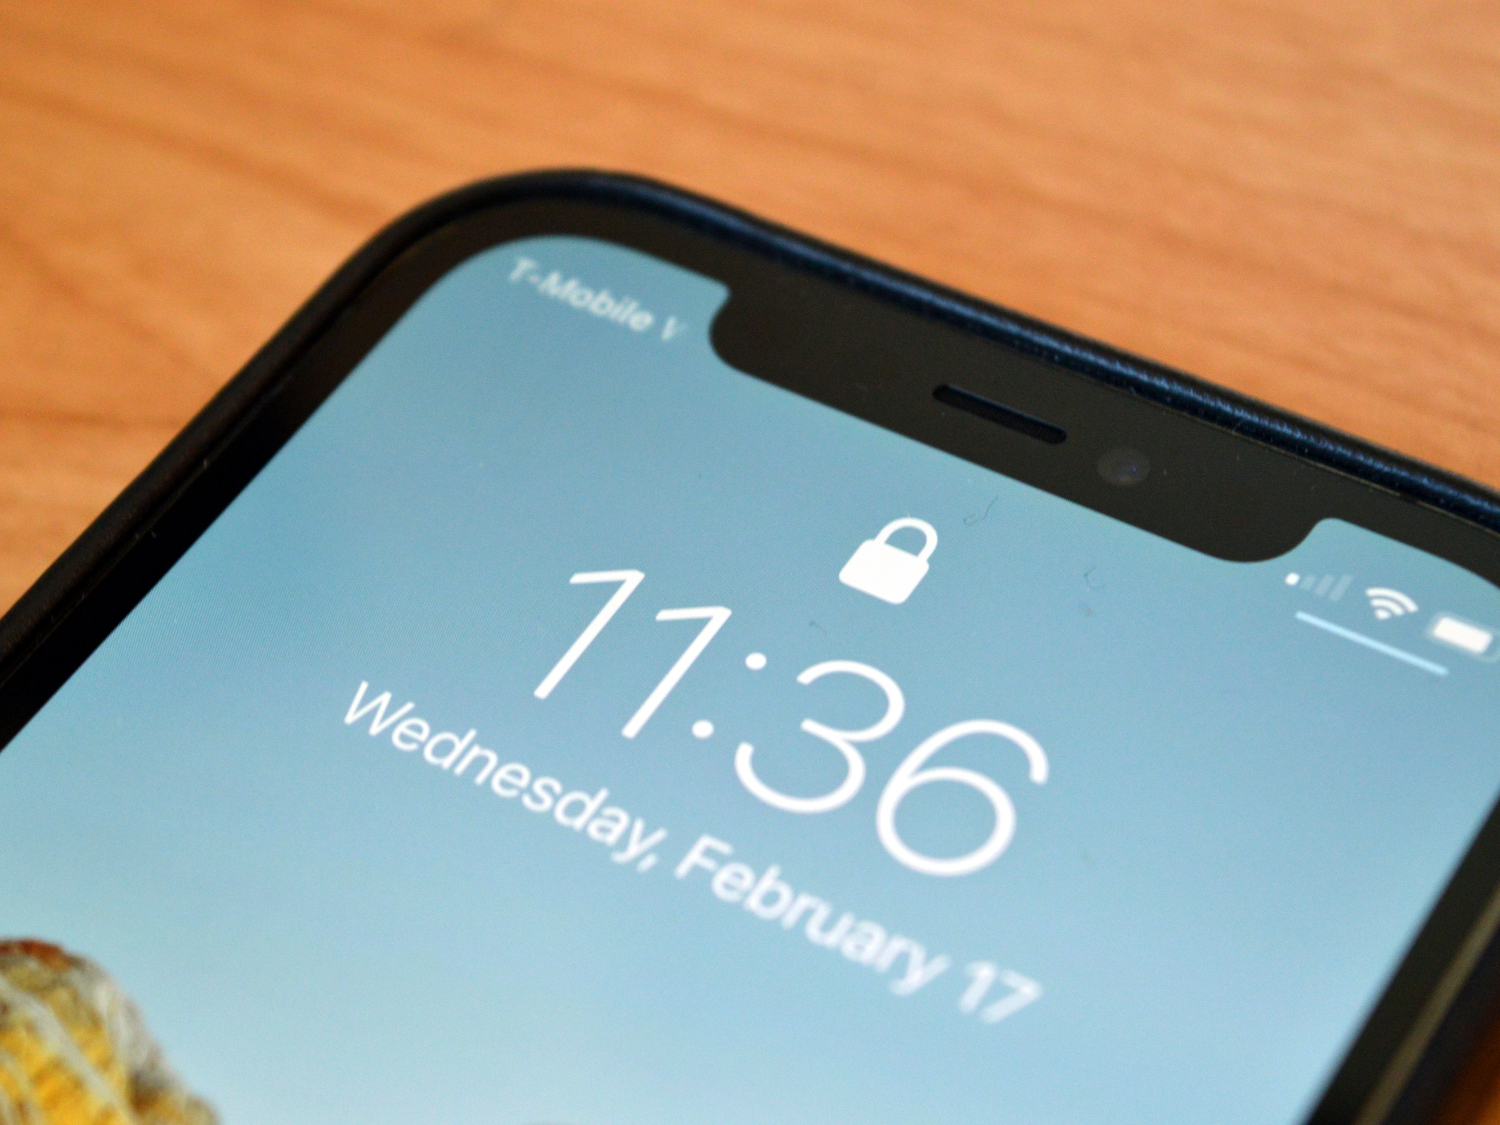 A locked iPhone, showing the lock icon at the top of the screen.